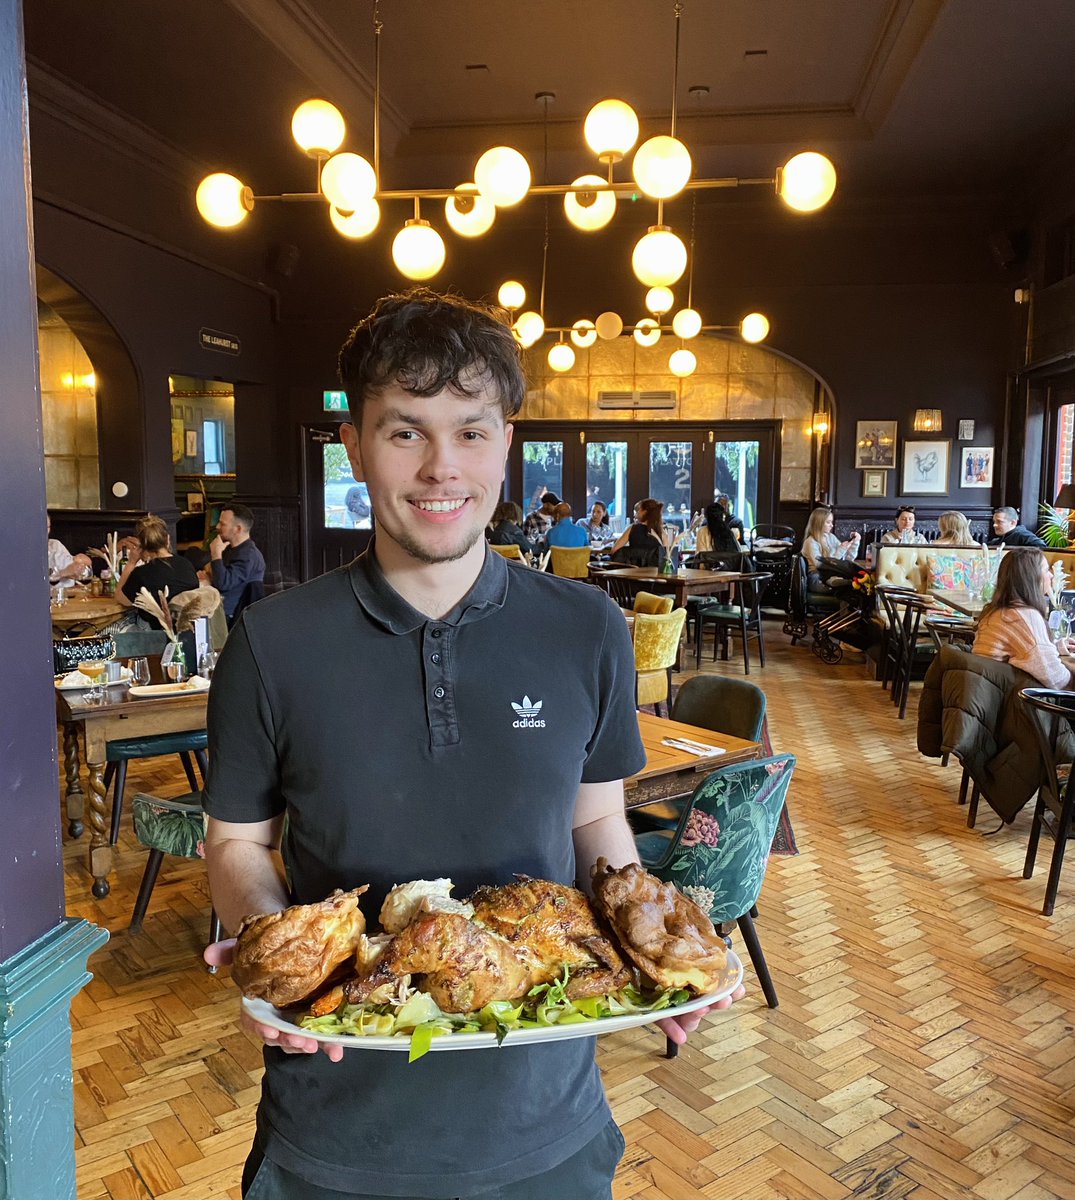 Happy Sunday from our team 🌟!! We’ve still got roasts available for you and the fam to dig into…like our sharing chicken roast for two with all the delicious Sunday trimmings🍗🍽️ #sunday #youngspublife #joinus #hithergreen #youngspubs